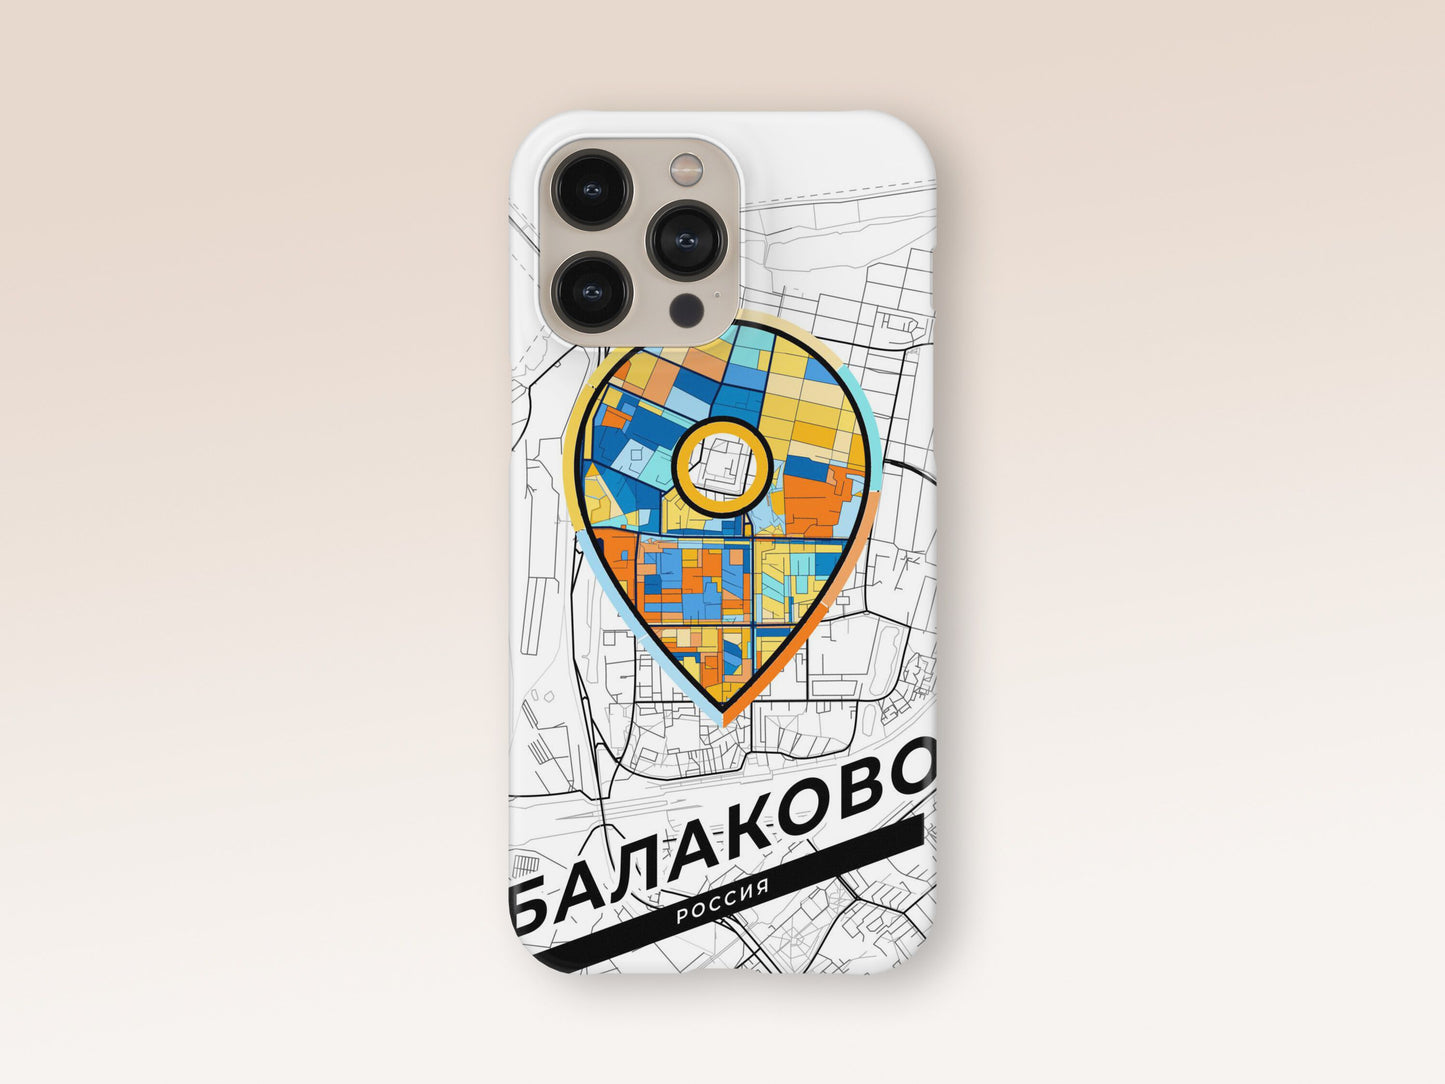 Balakovo Russia slim phone case with colorful icon. Birthday, wedding or housewarming gift. Couple match cases. 1